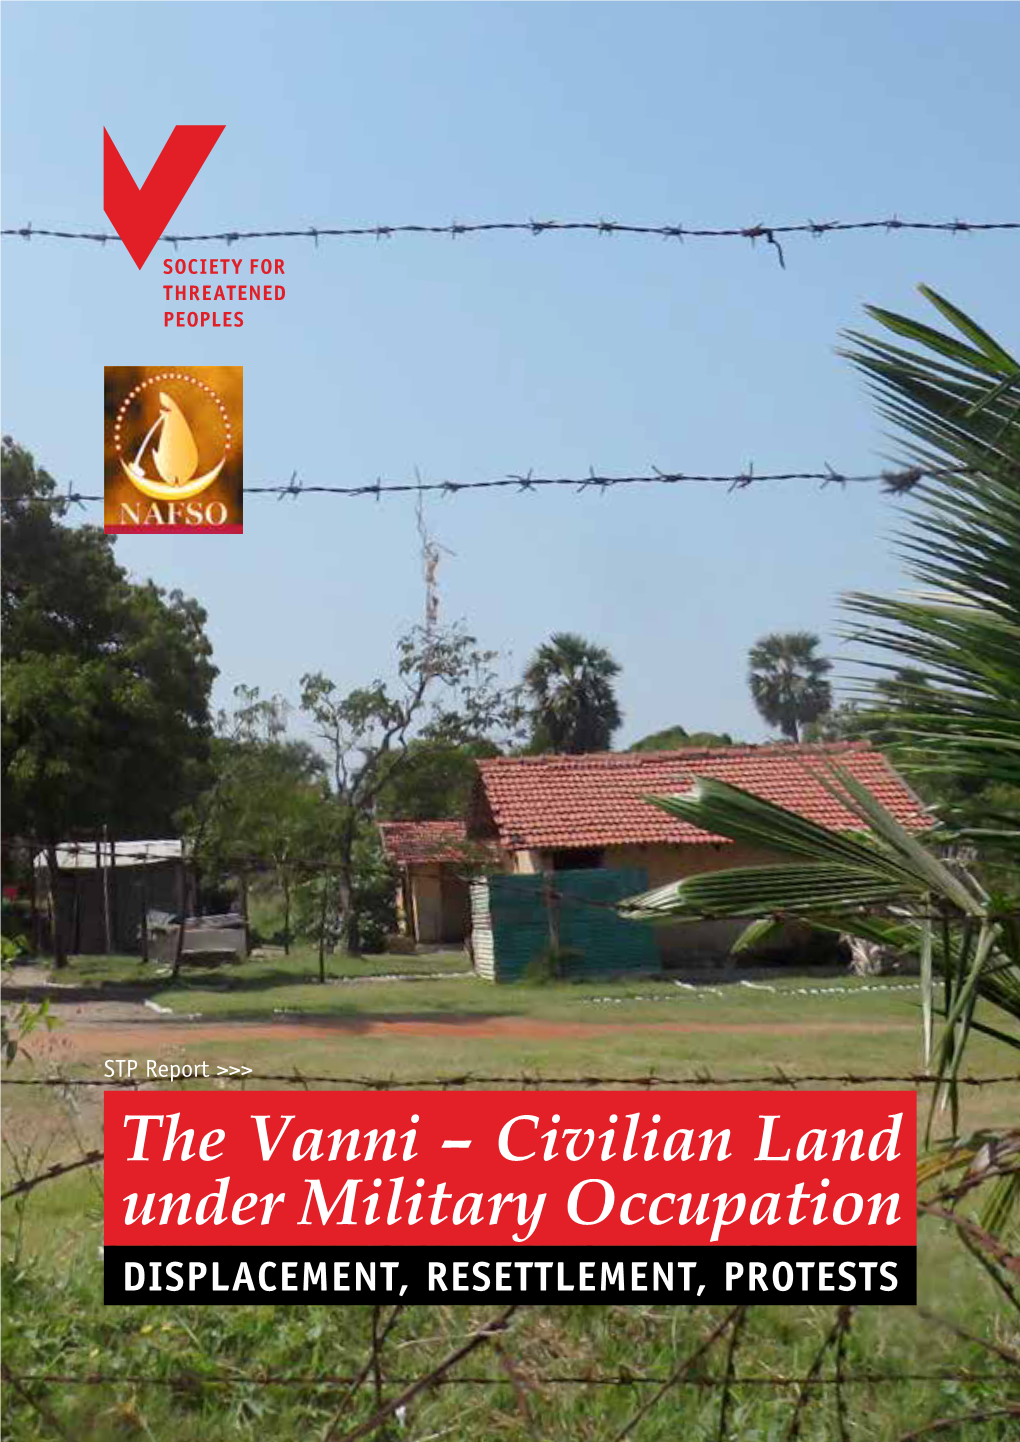 The Vanni – Civilian Land Under Military Occupation DISPLACEMENT, RESETTLEMENT, PROTESTS